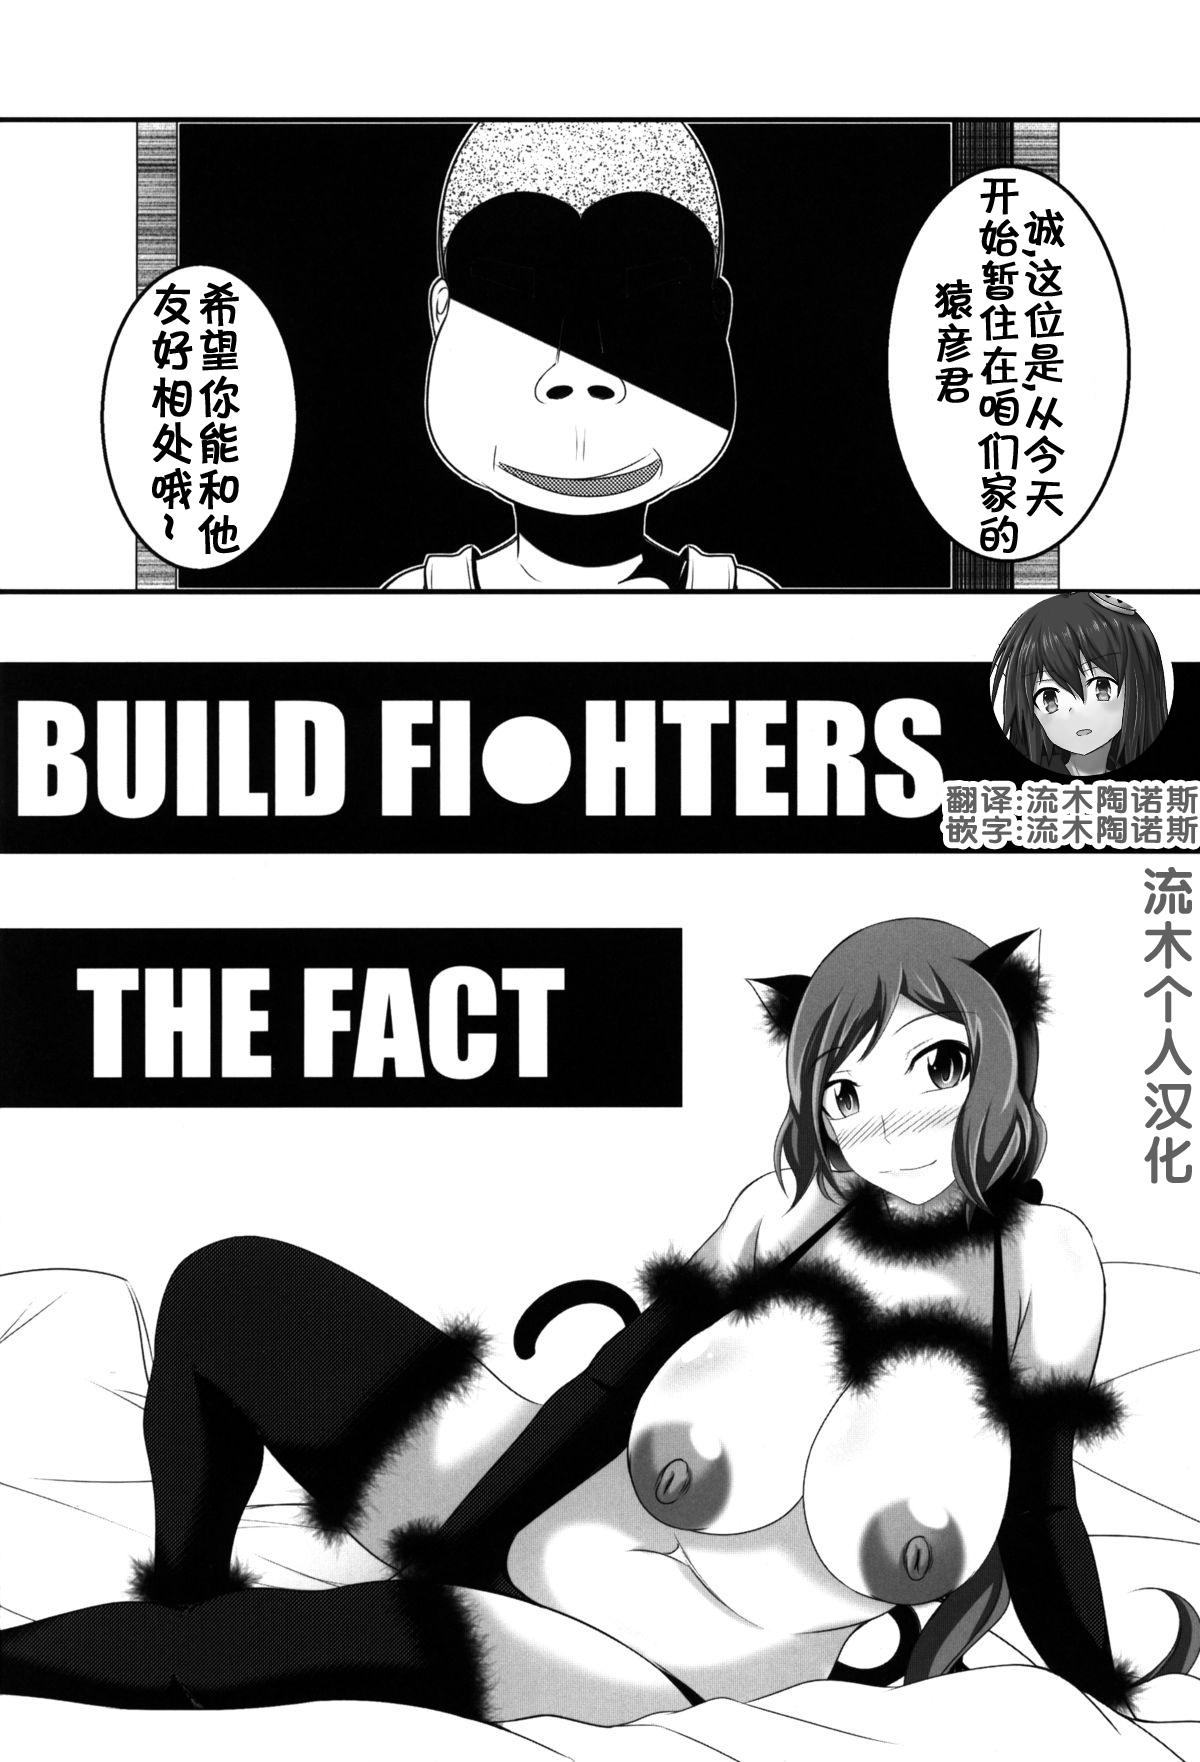 BUILD FIGHTERS THE FACT 2